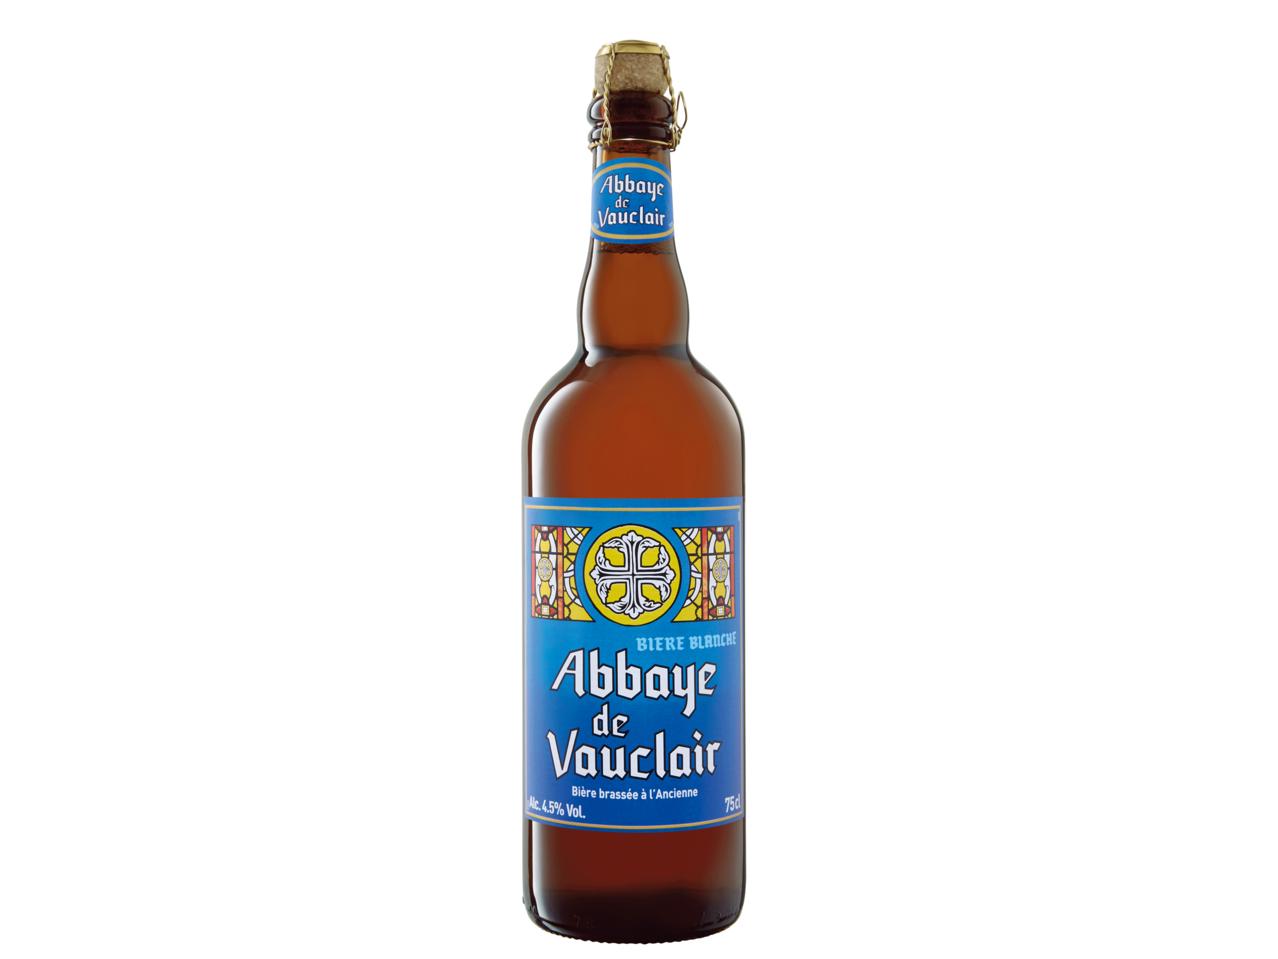 ABBAYE DE VAUCLAIR French Wheat Beer1